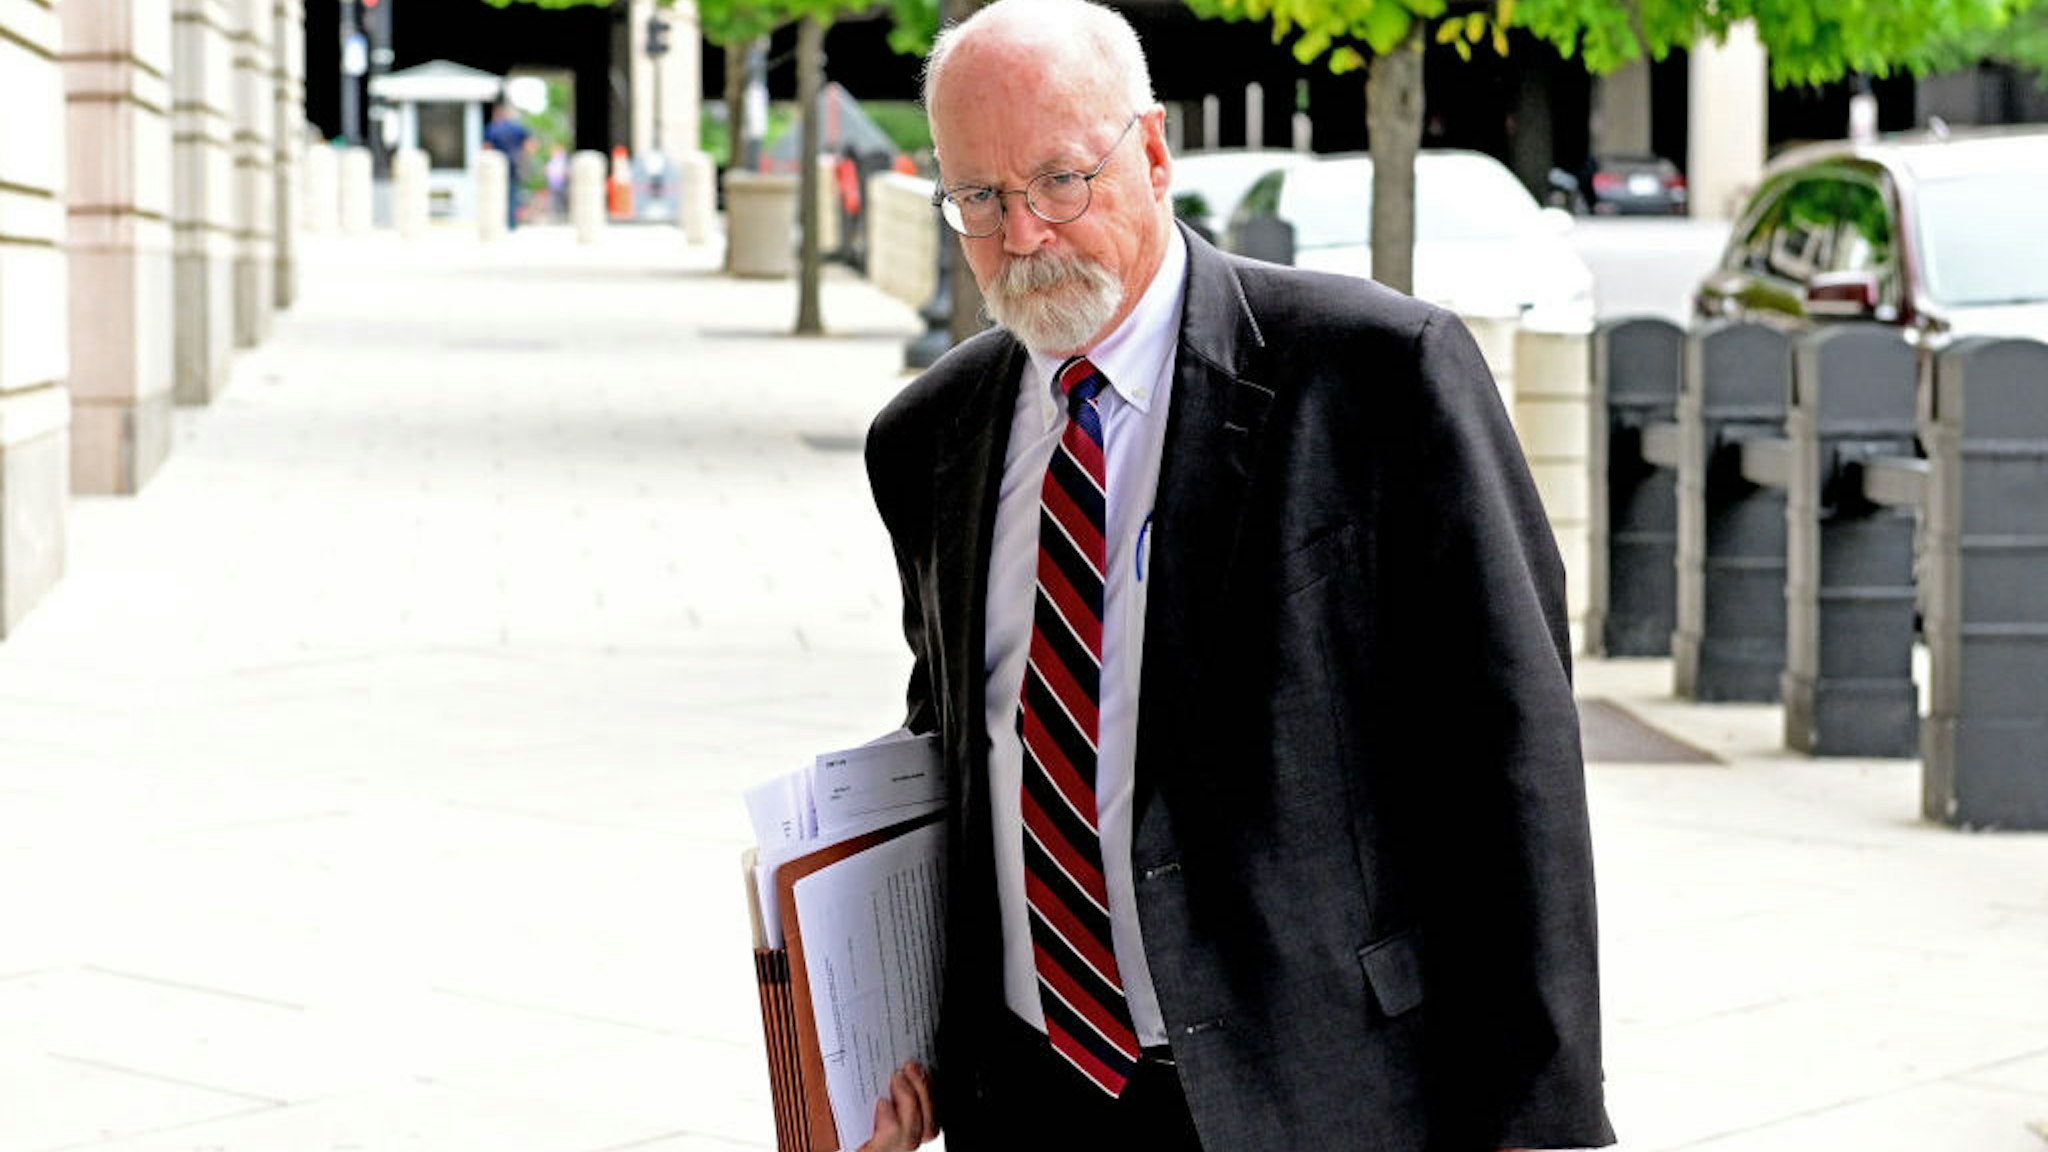 WASHINGTON, DC - MAY 26: Special Counsel John Durham, who then-United States Attorney General William Barr appointed in 2019 after the release of the Mueller report to probe the origins of the Trump-Russia investigation, arrives for his trial at the United States District Court for the District of Columbia on May 26, 2022 in Washington, DC. (Photo by Ron Sachs/Consolidated News Pictures/Getty Images)